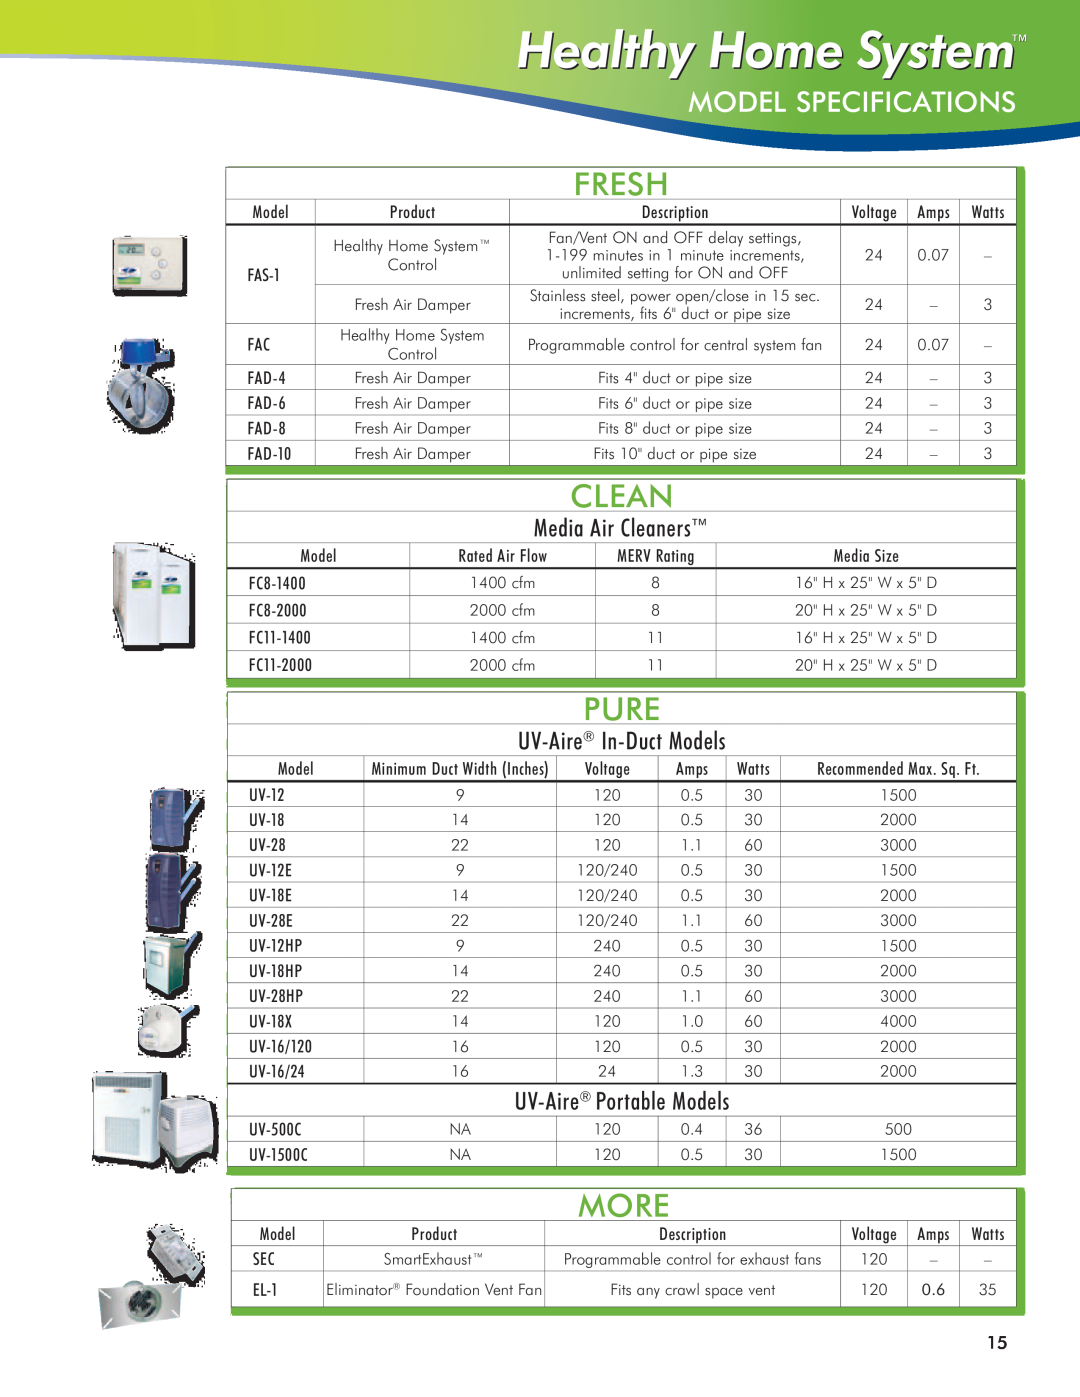 Field Controls IAQ11 Model Specifications, Media Air Cleaners, UV-Aire In-DuctModels, UV-Aire Portable Models, Fresh, Pure 